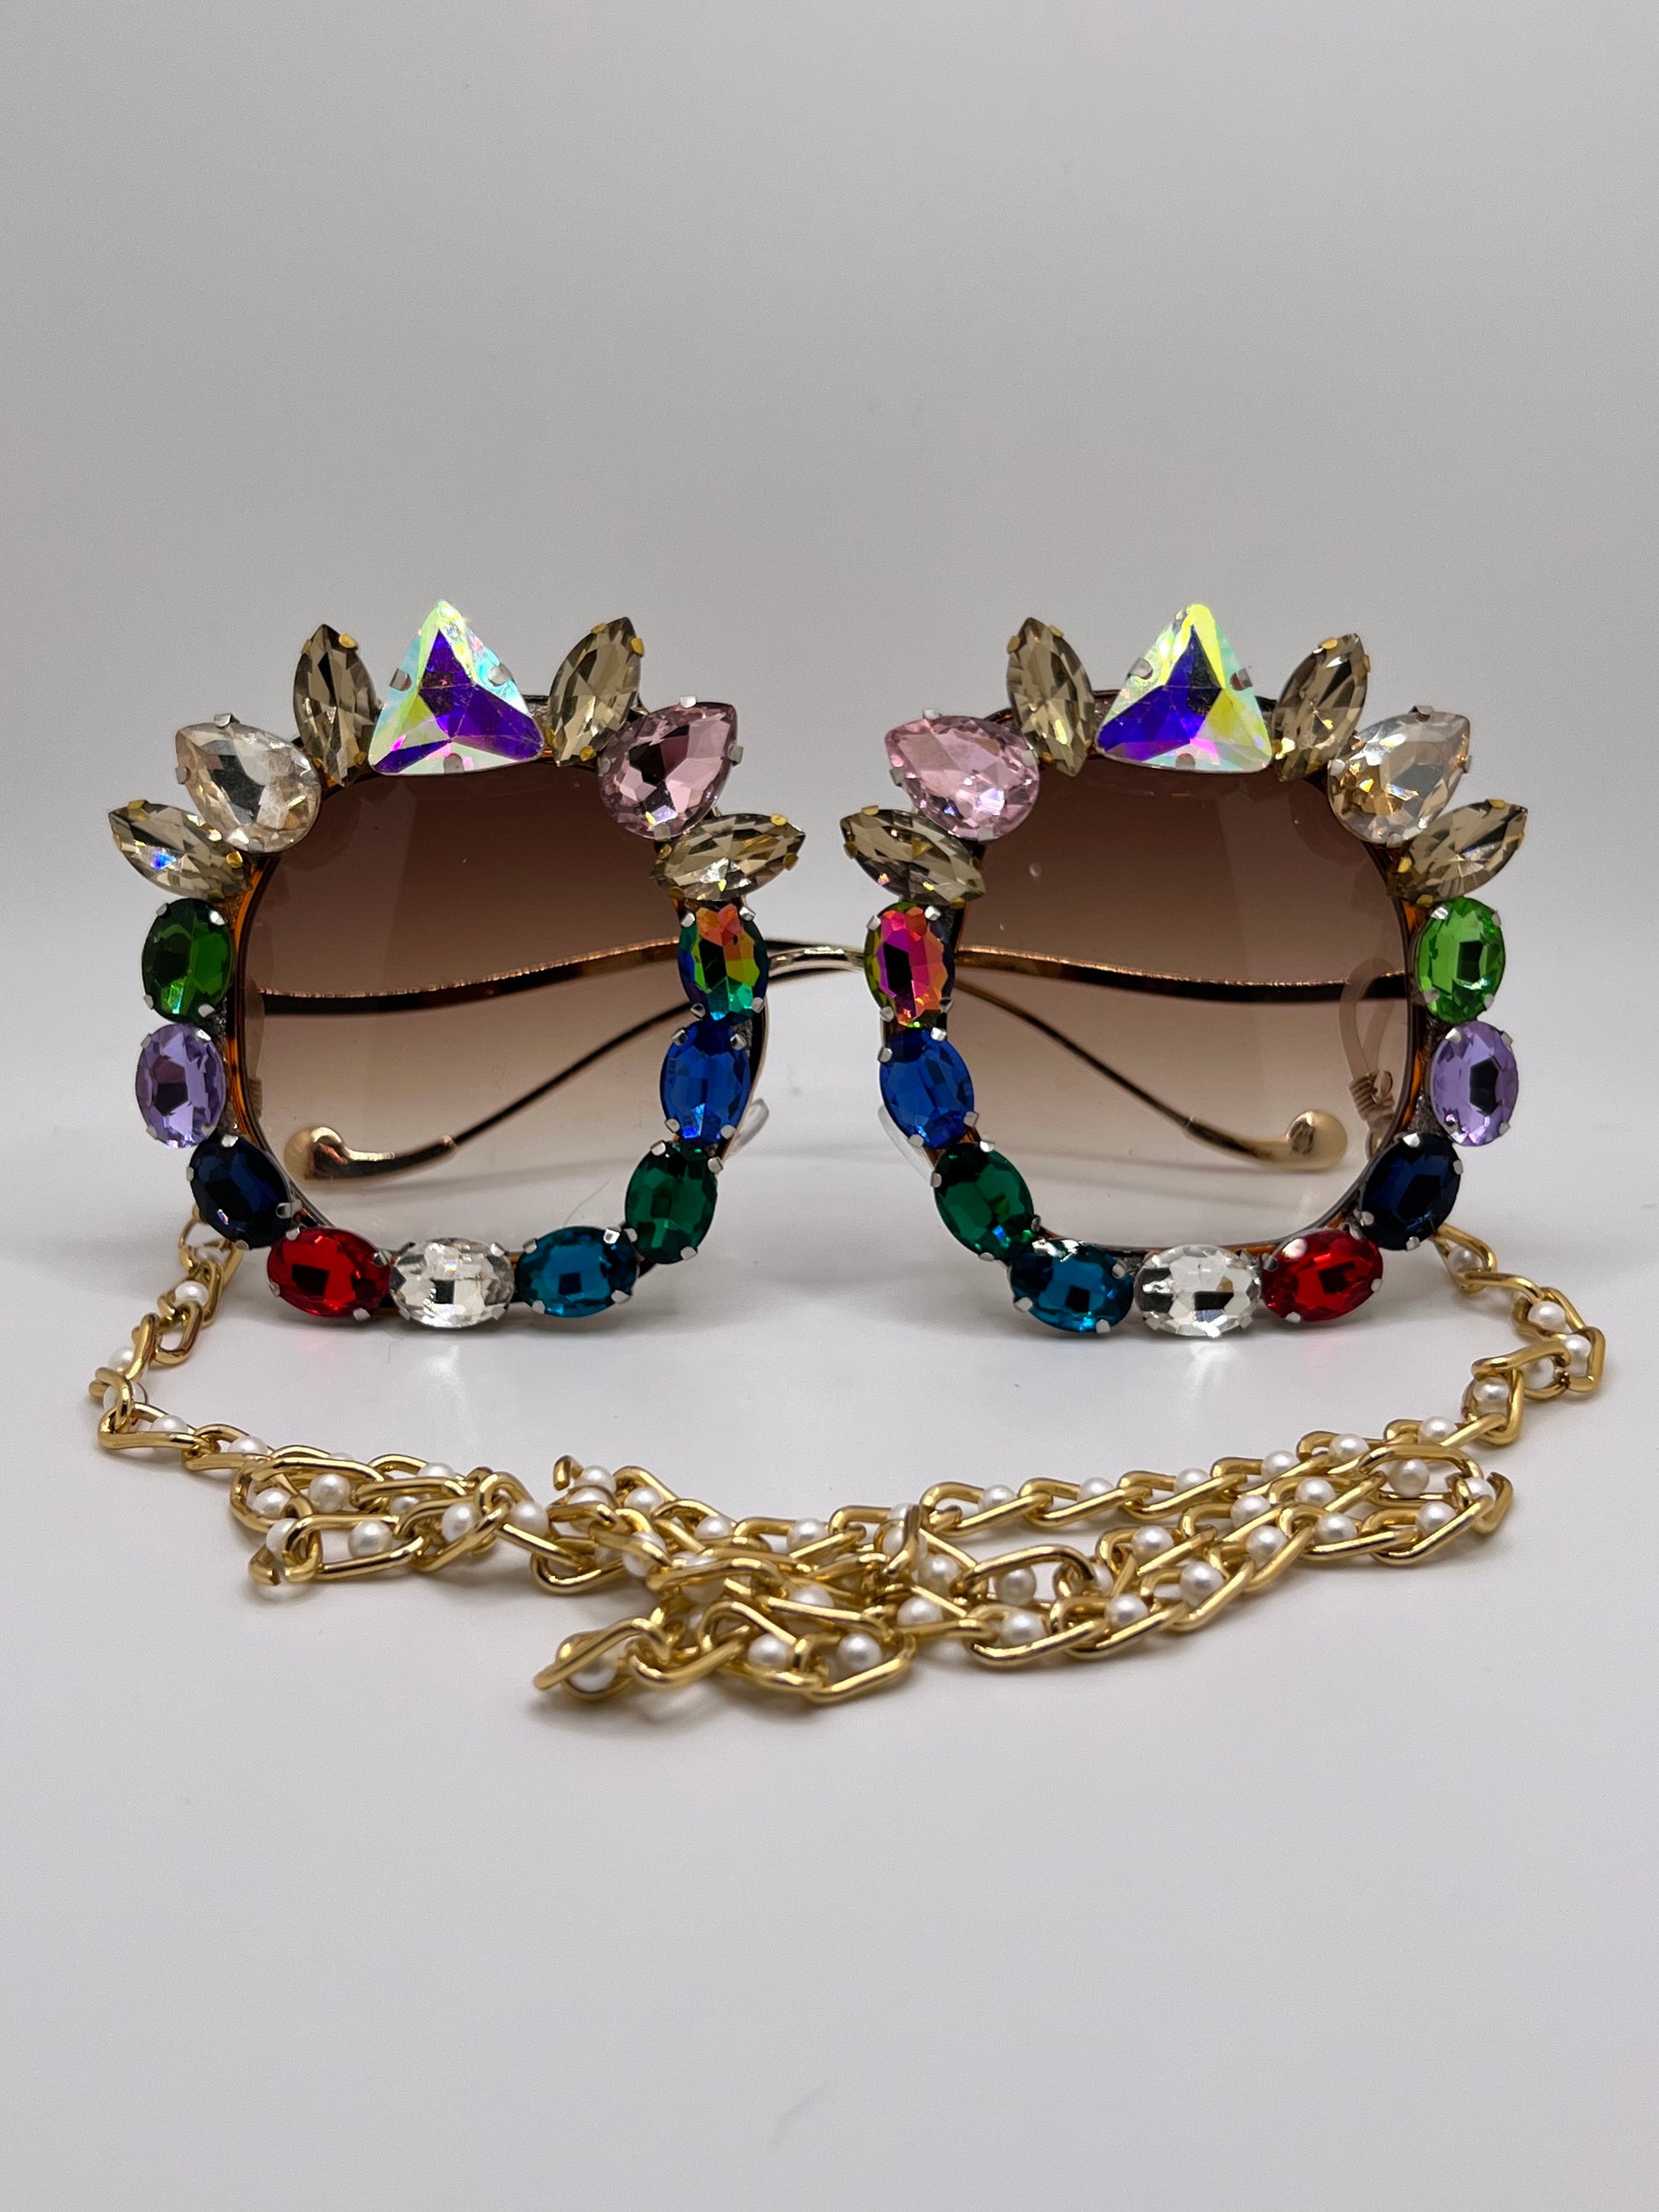 Sparkling rhinestones surround these oversized sunglasses and are accompanied by an adjustable and removable eyewear chain.